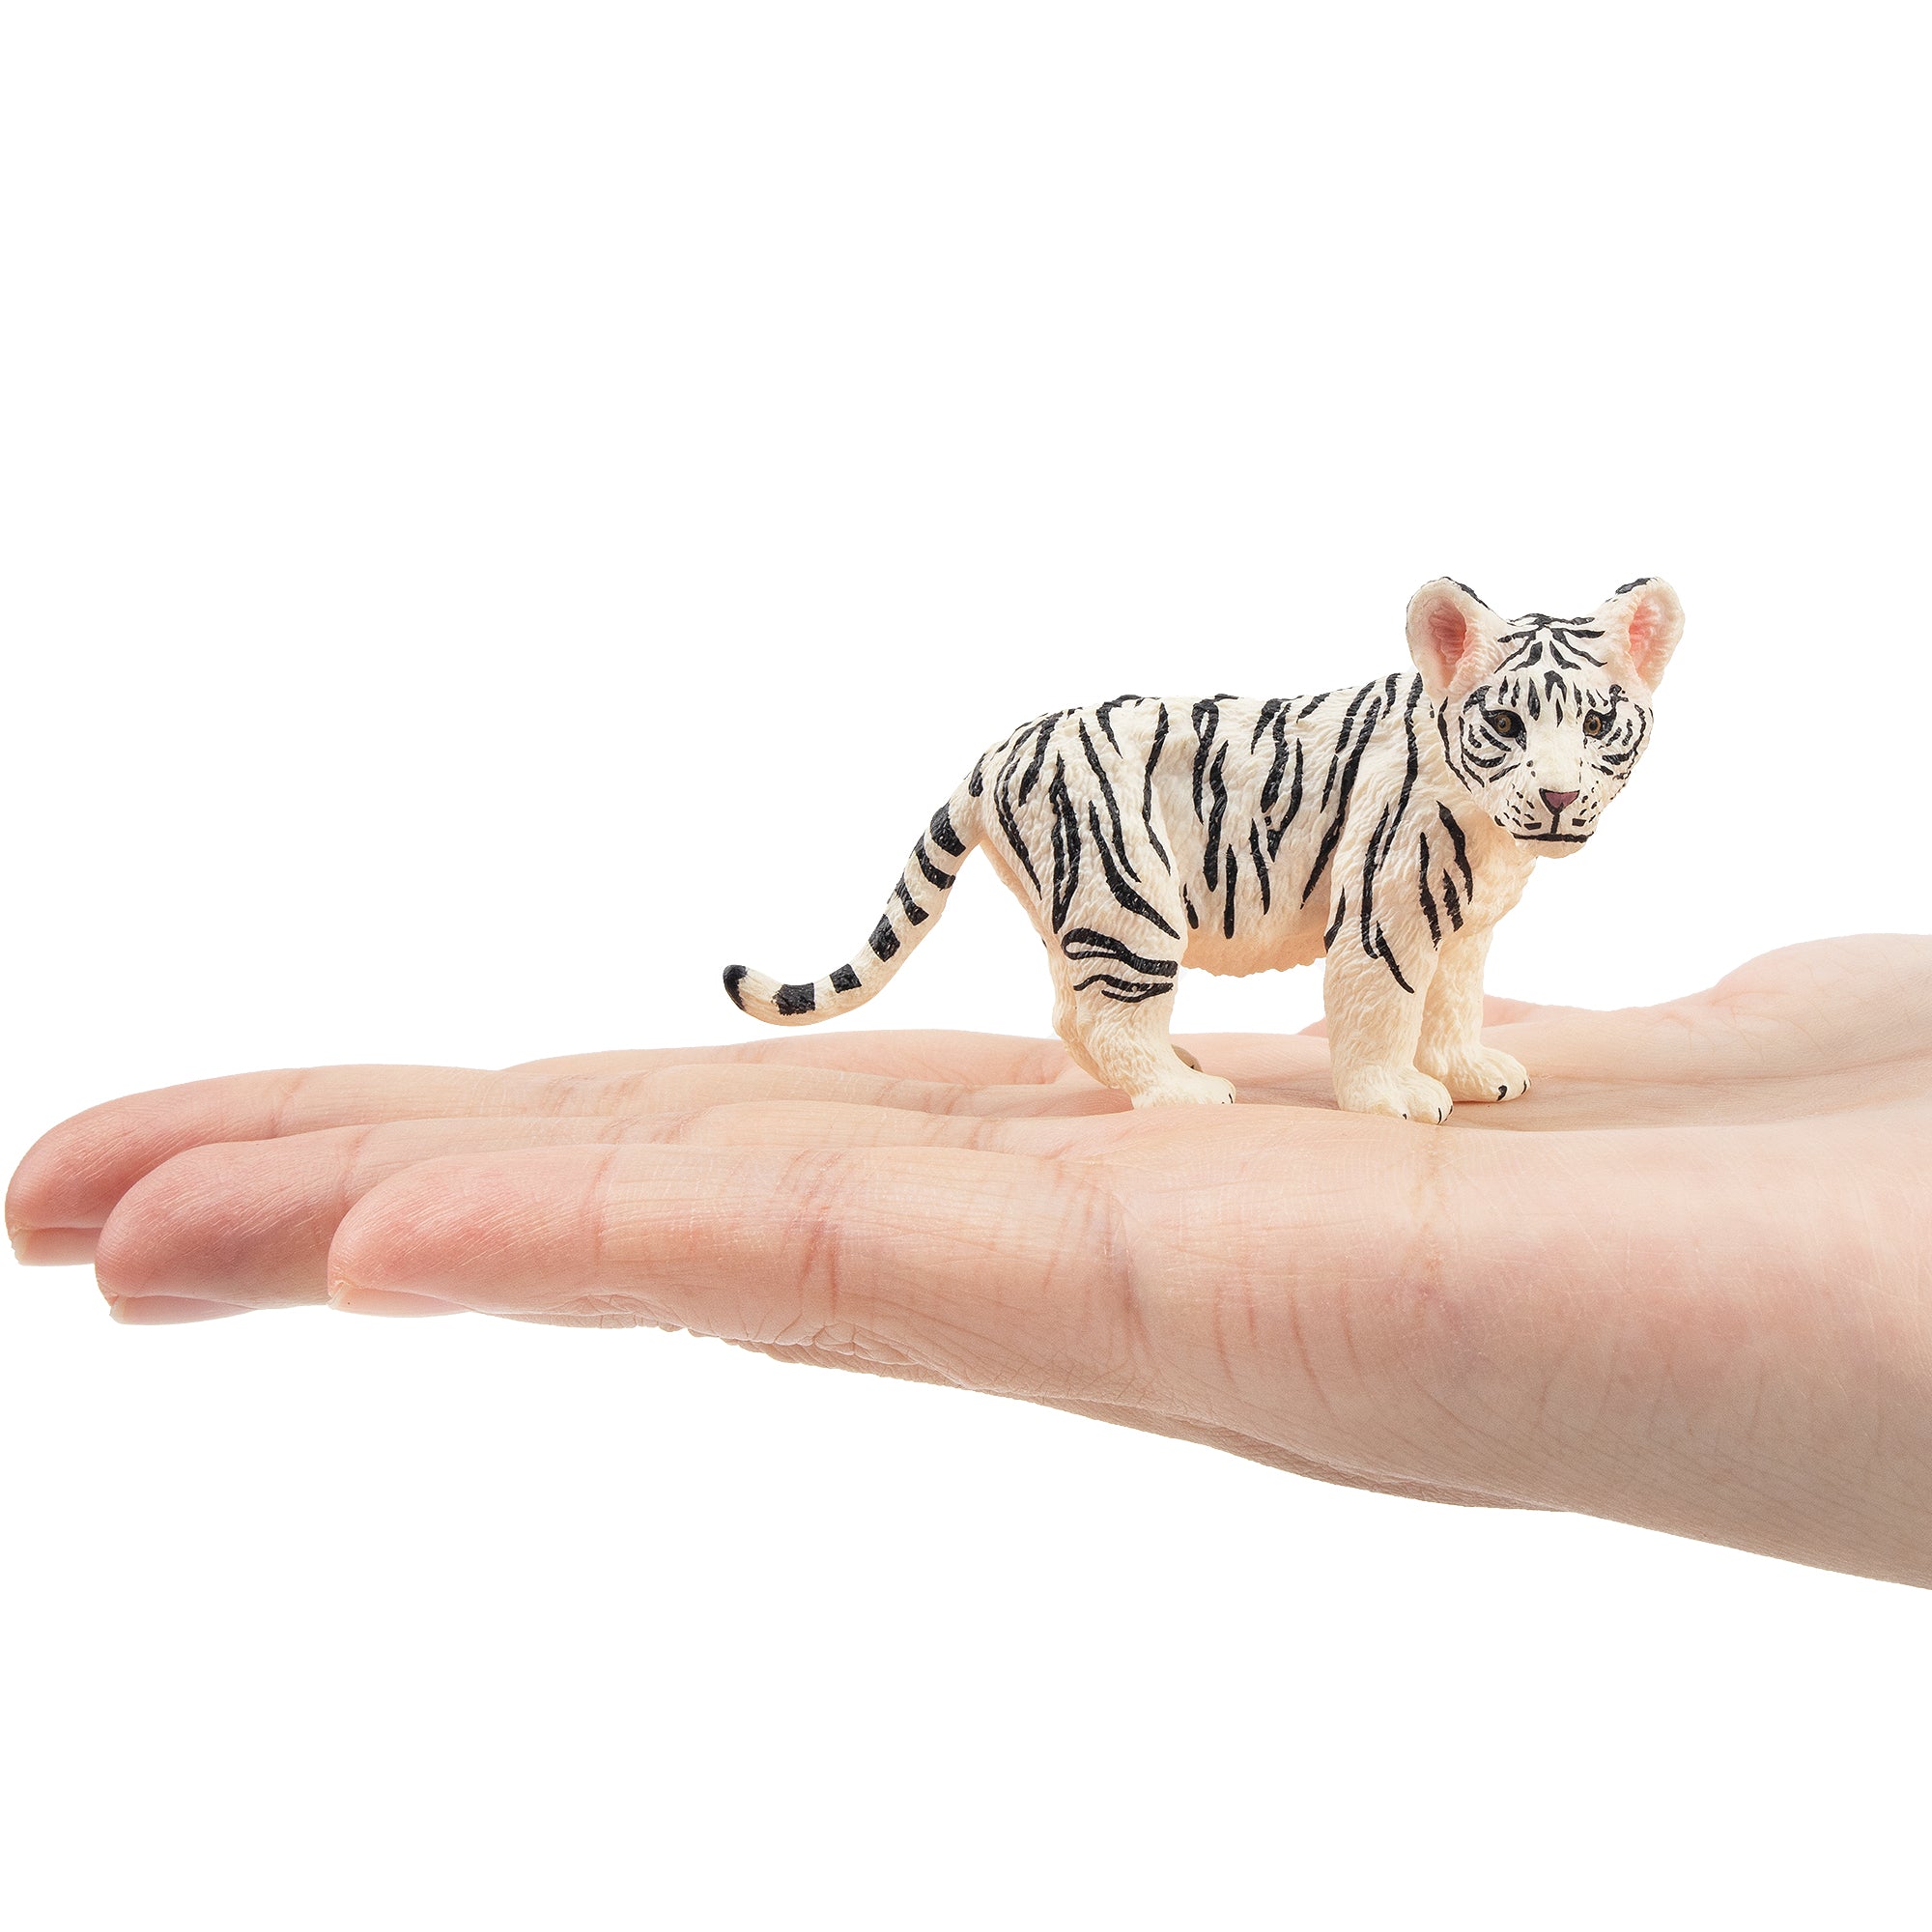 Toymany Standing White Tiger Cub Figurine Toy - 1-on hand